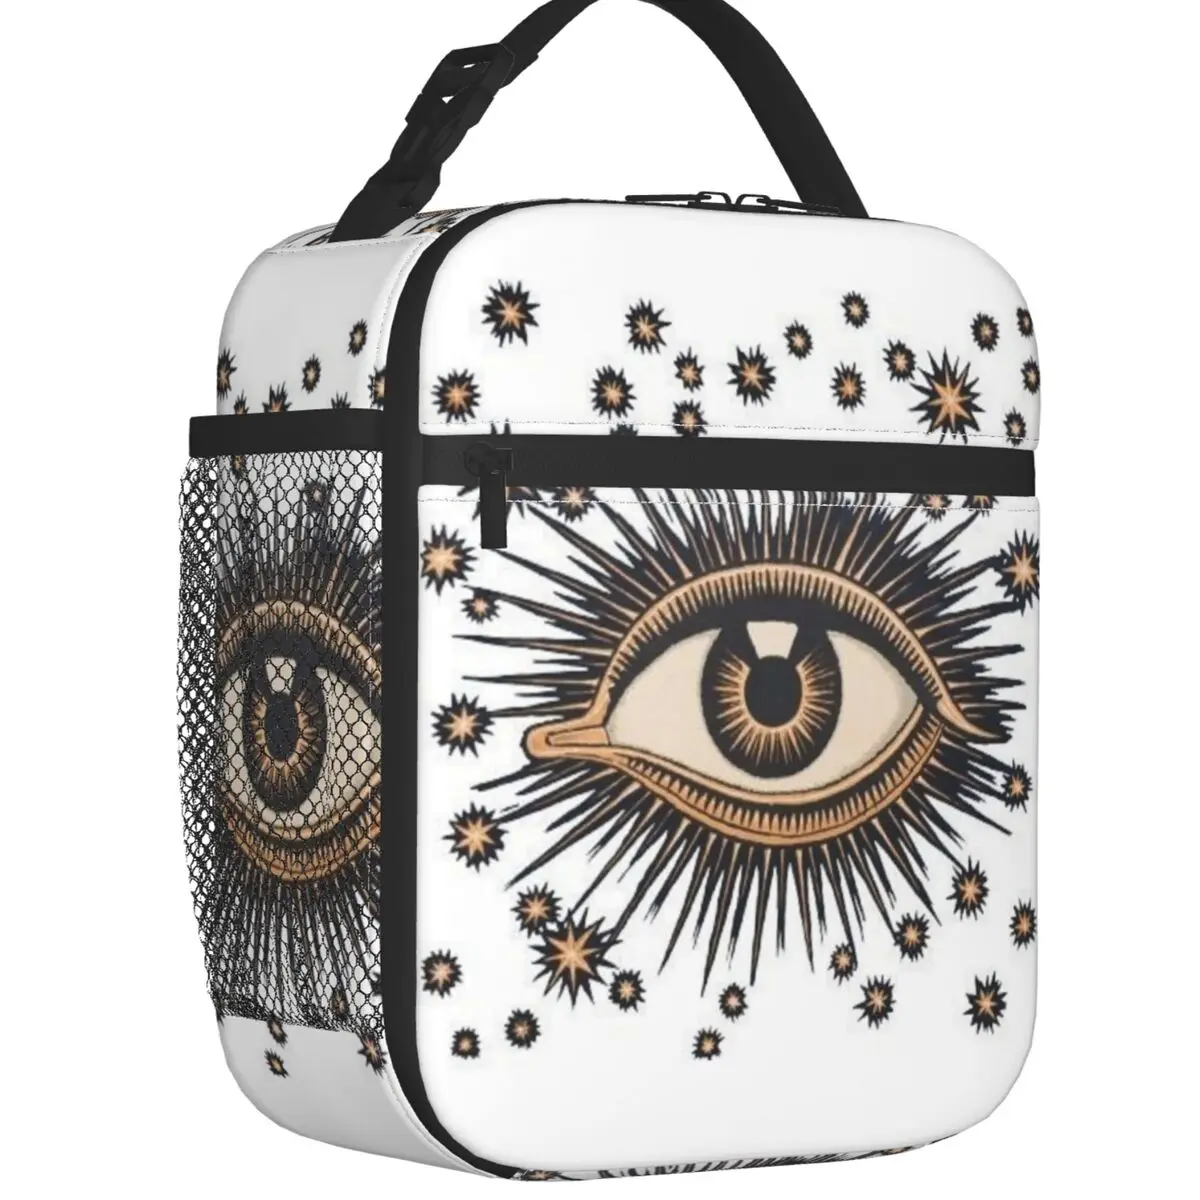 

Turkish Evil Eye Thermal Insulated Lunch Bag Nazar Amulet Pattern Boho Portable Lunch Tote Work School Travel Storage Food Box